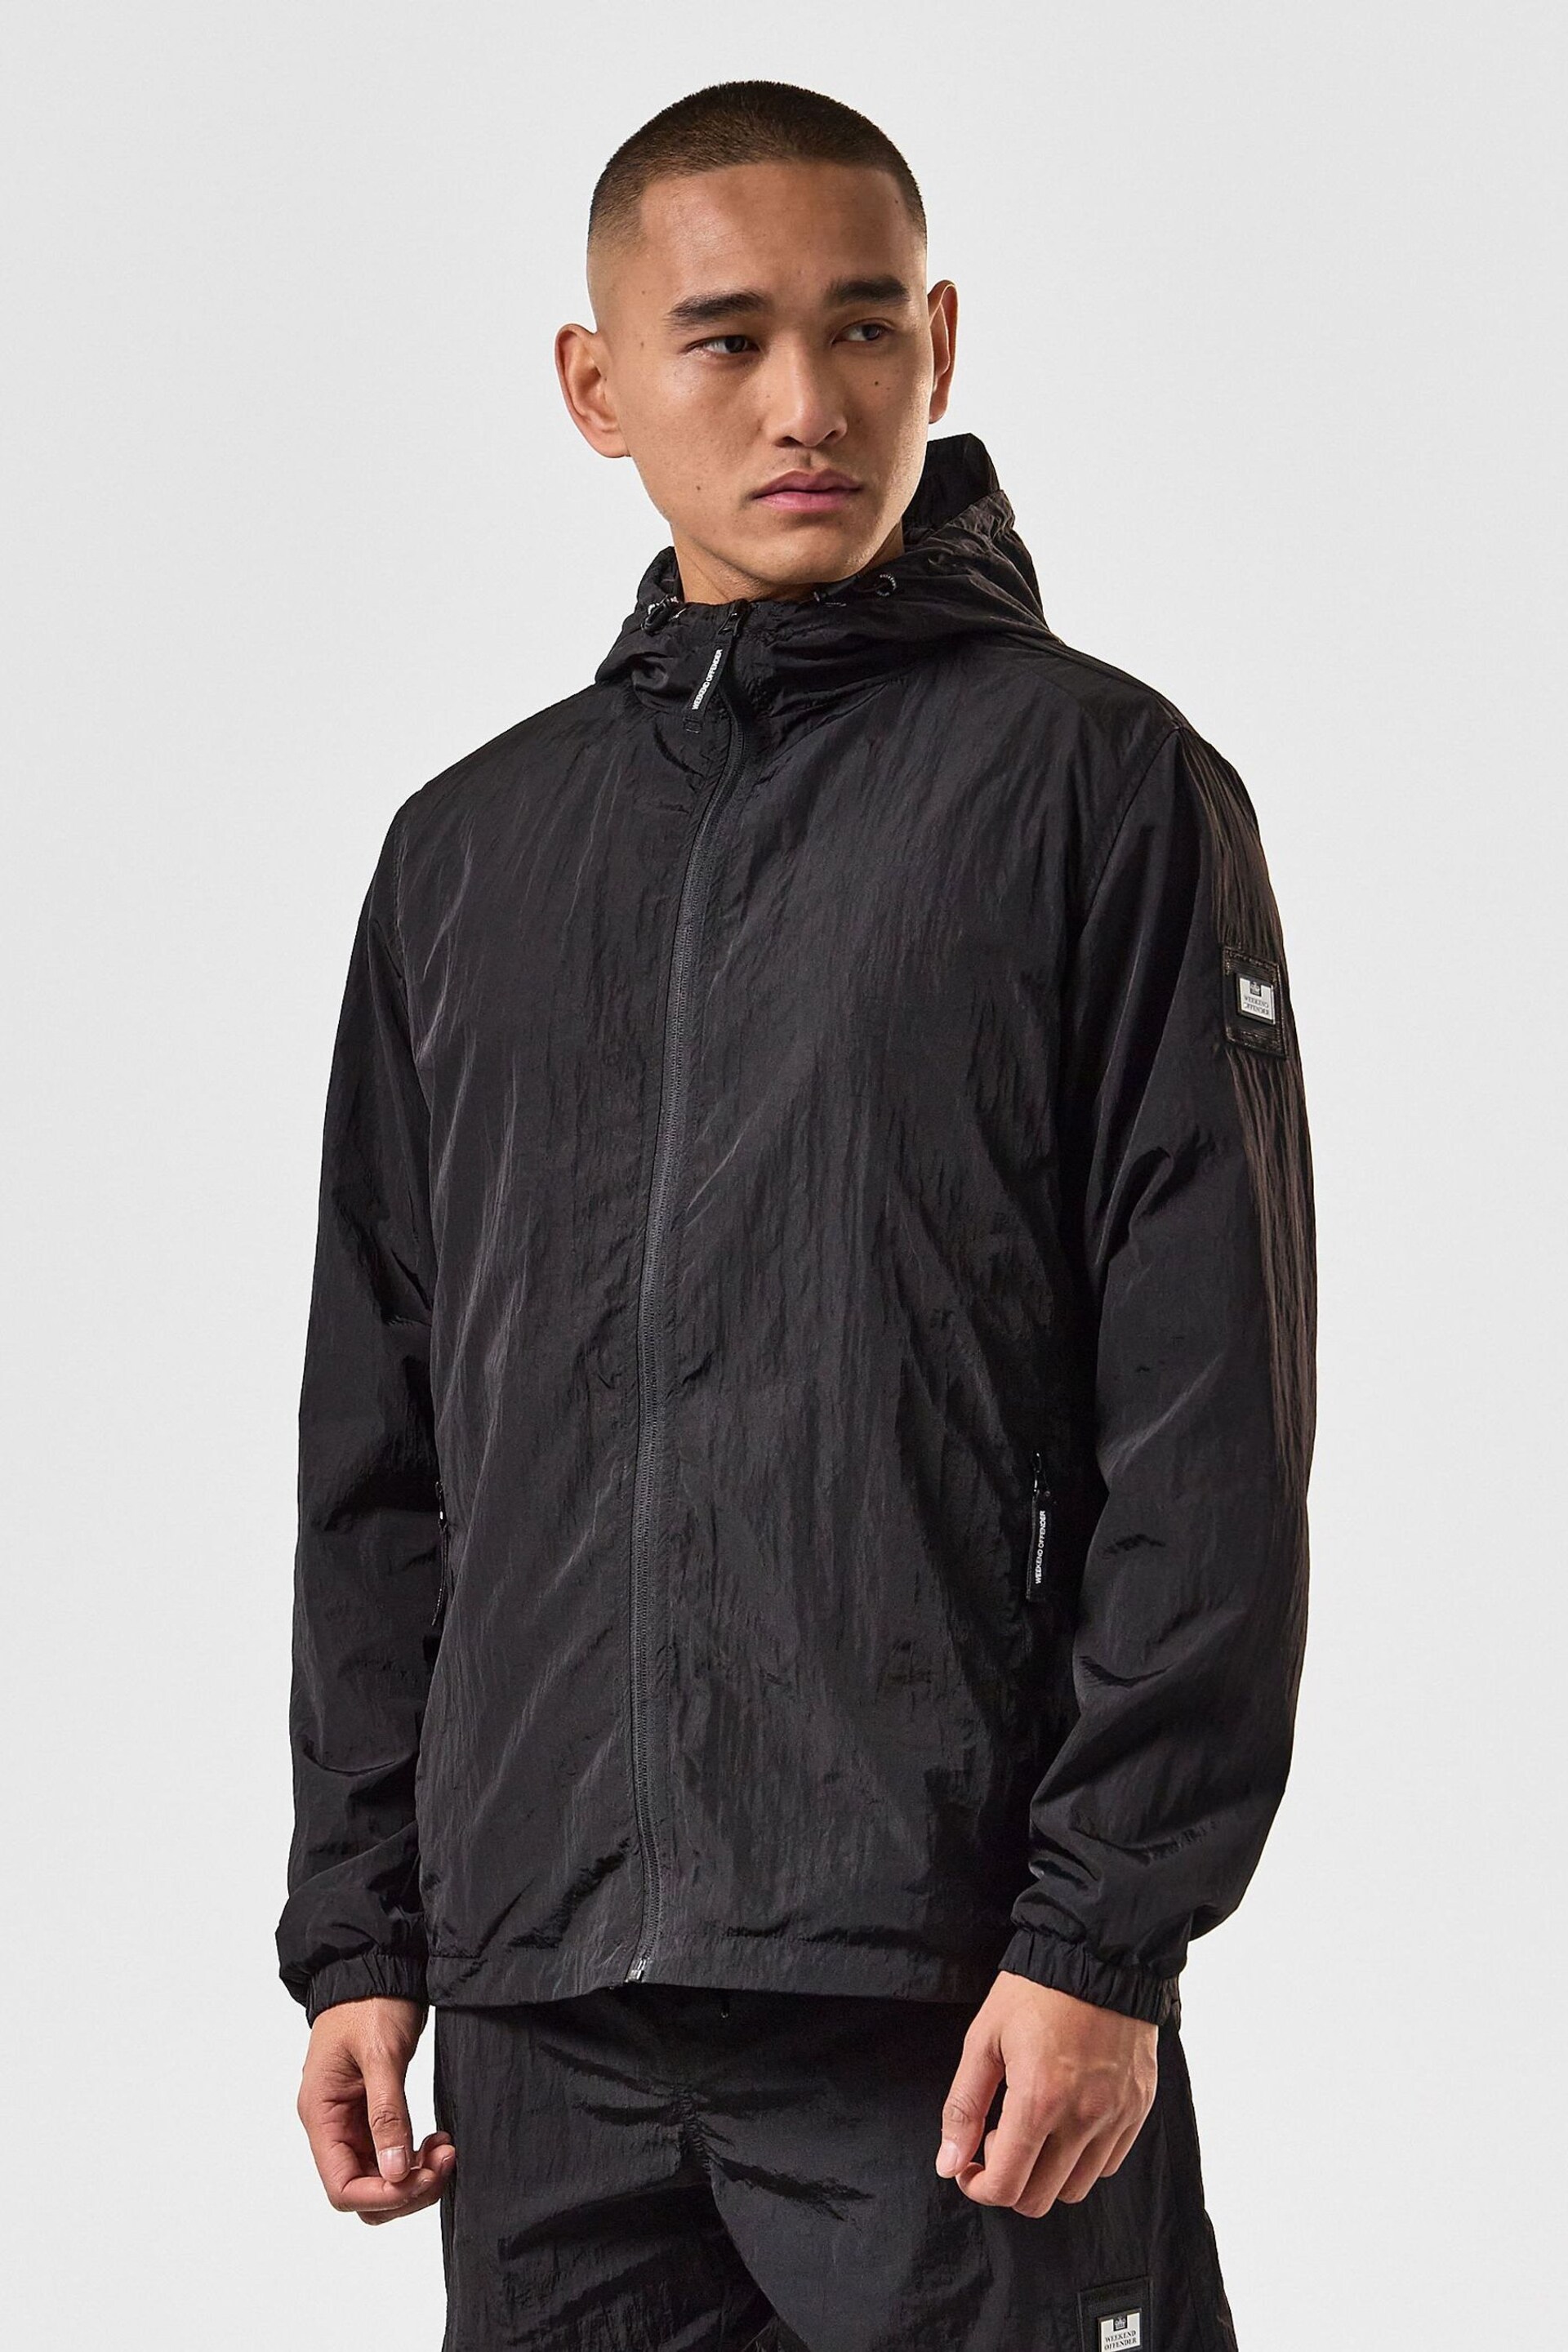 Weekend Offender Mens Black Classic Technician Jacket - Image 1 of 4